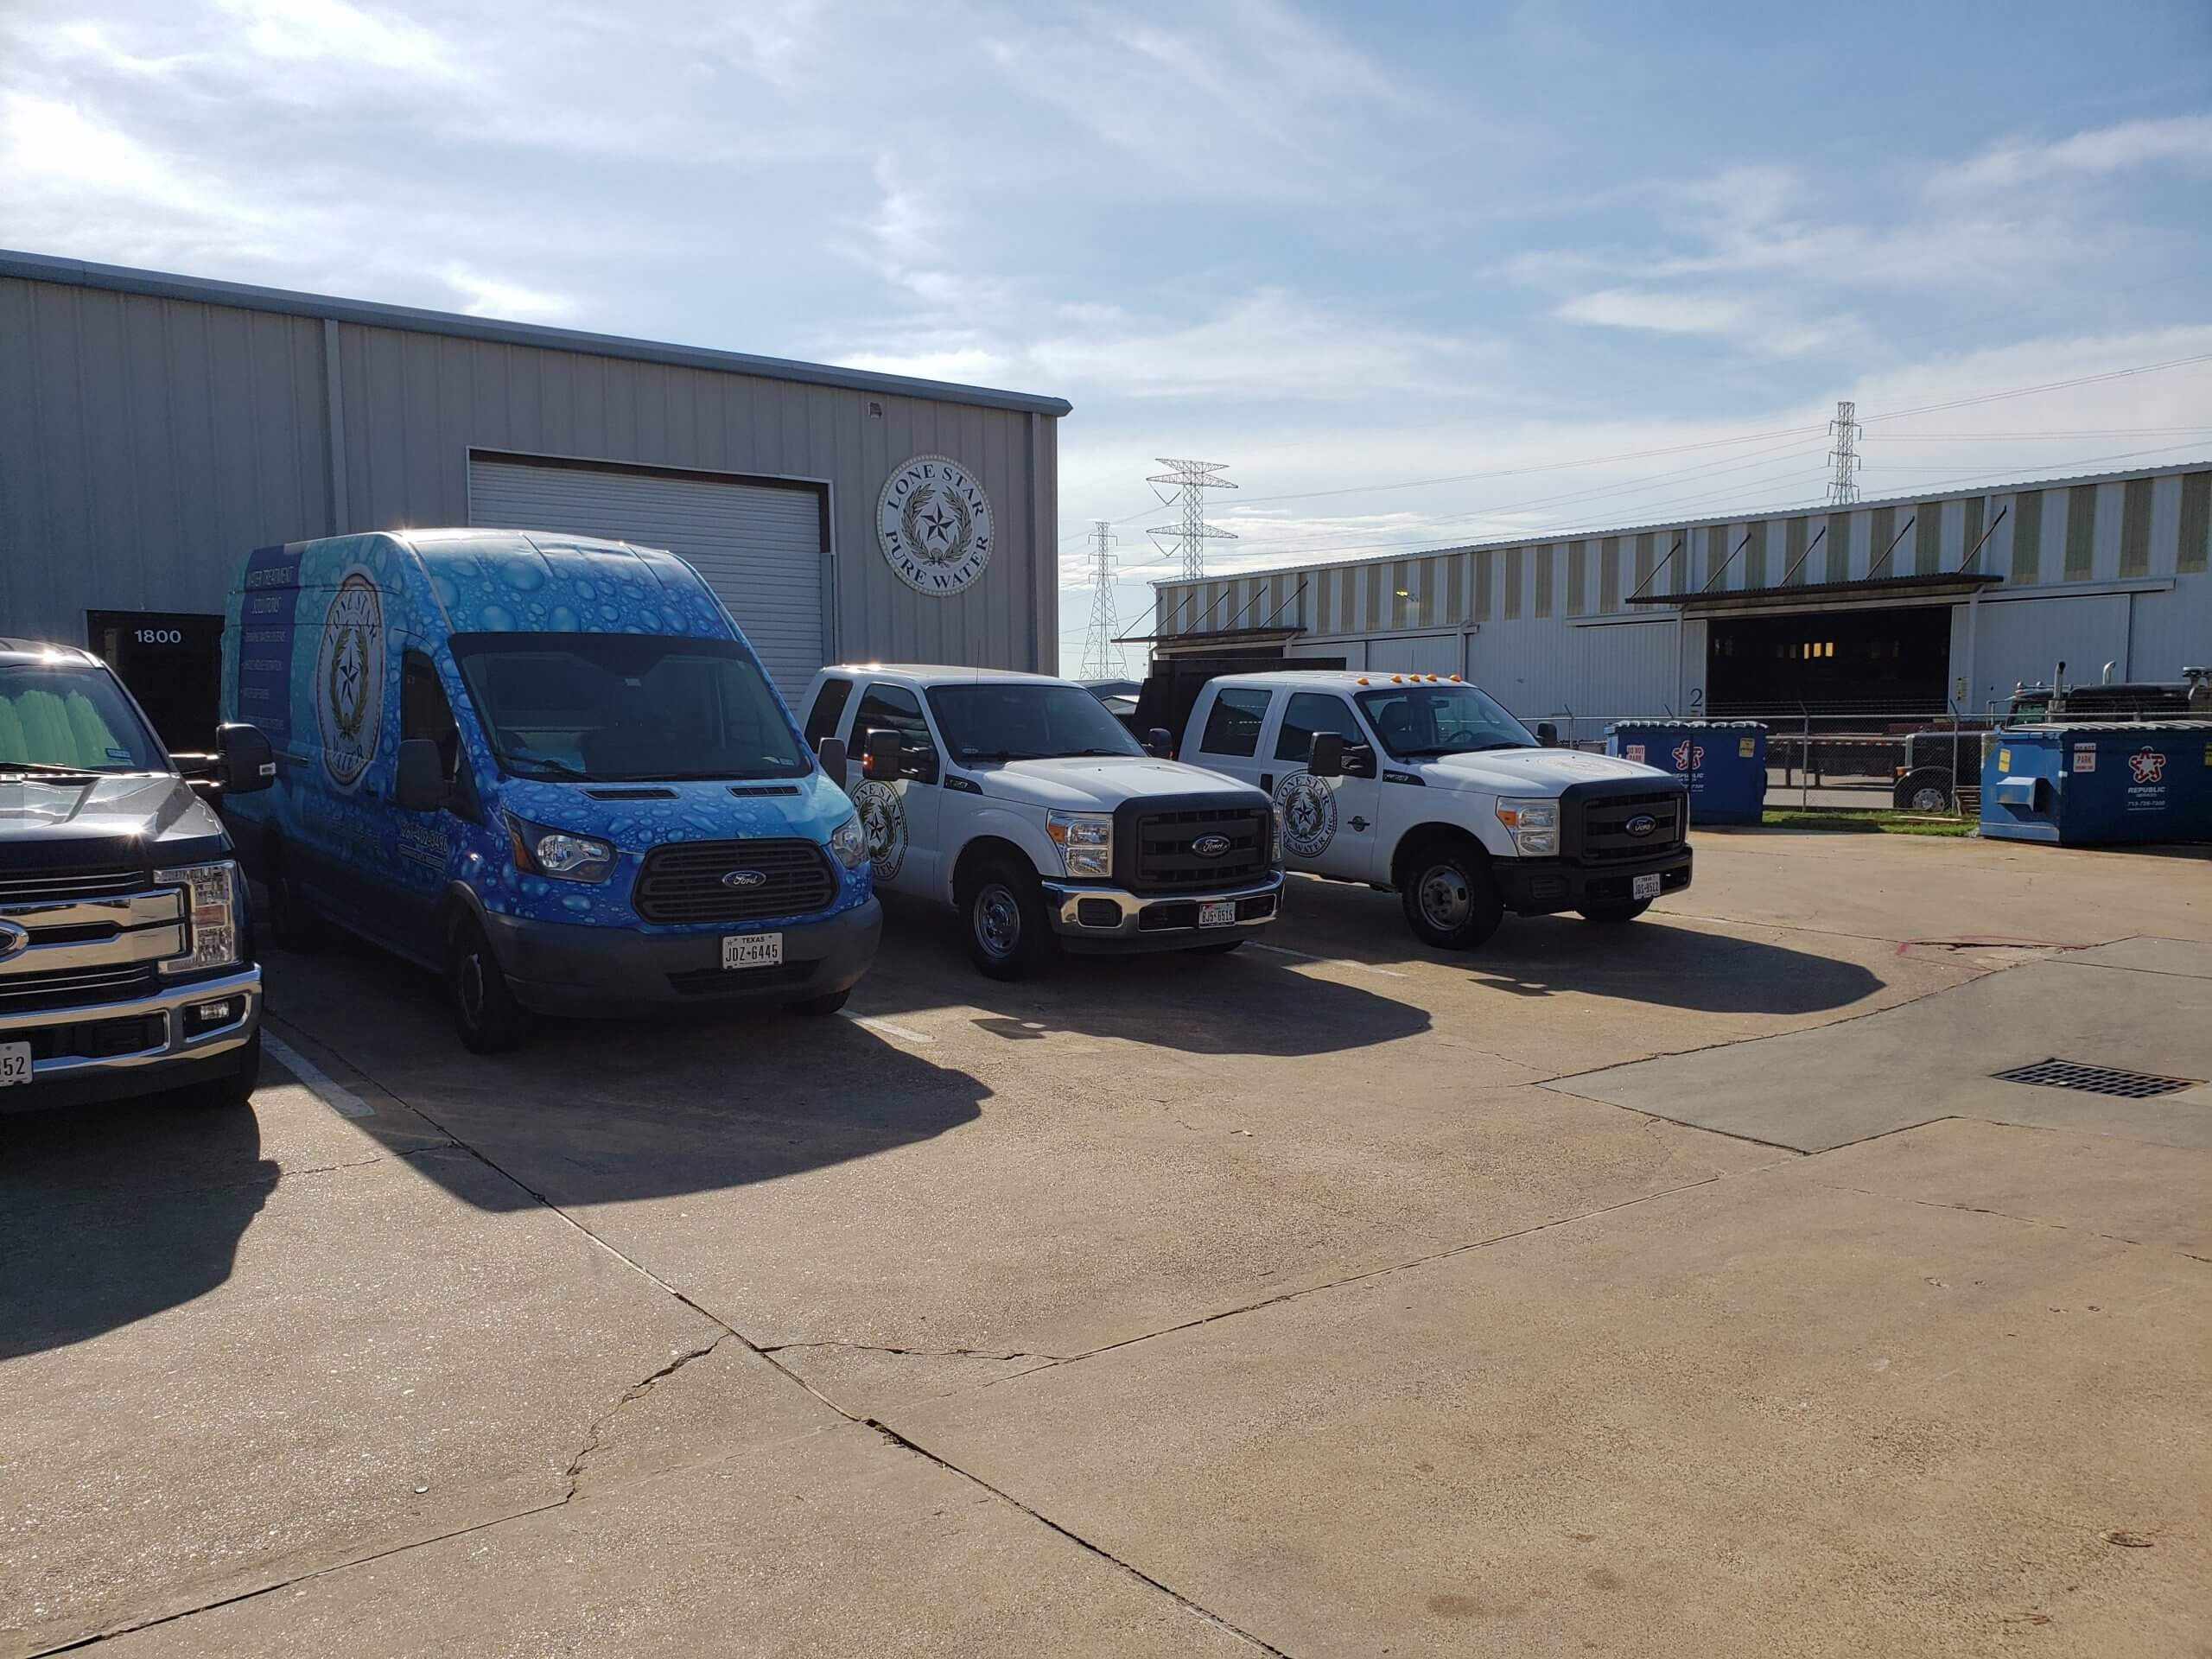 Vehicles parked at the lone star company